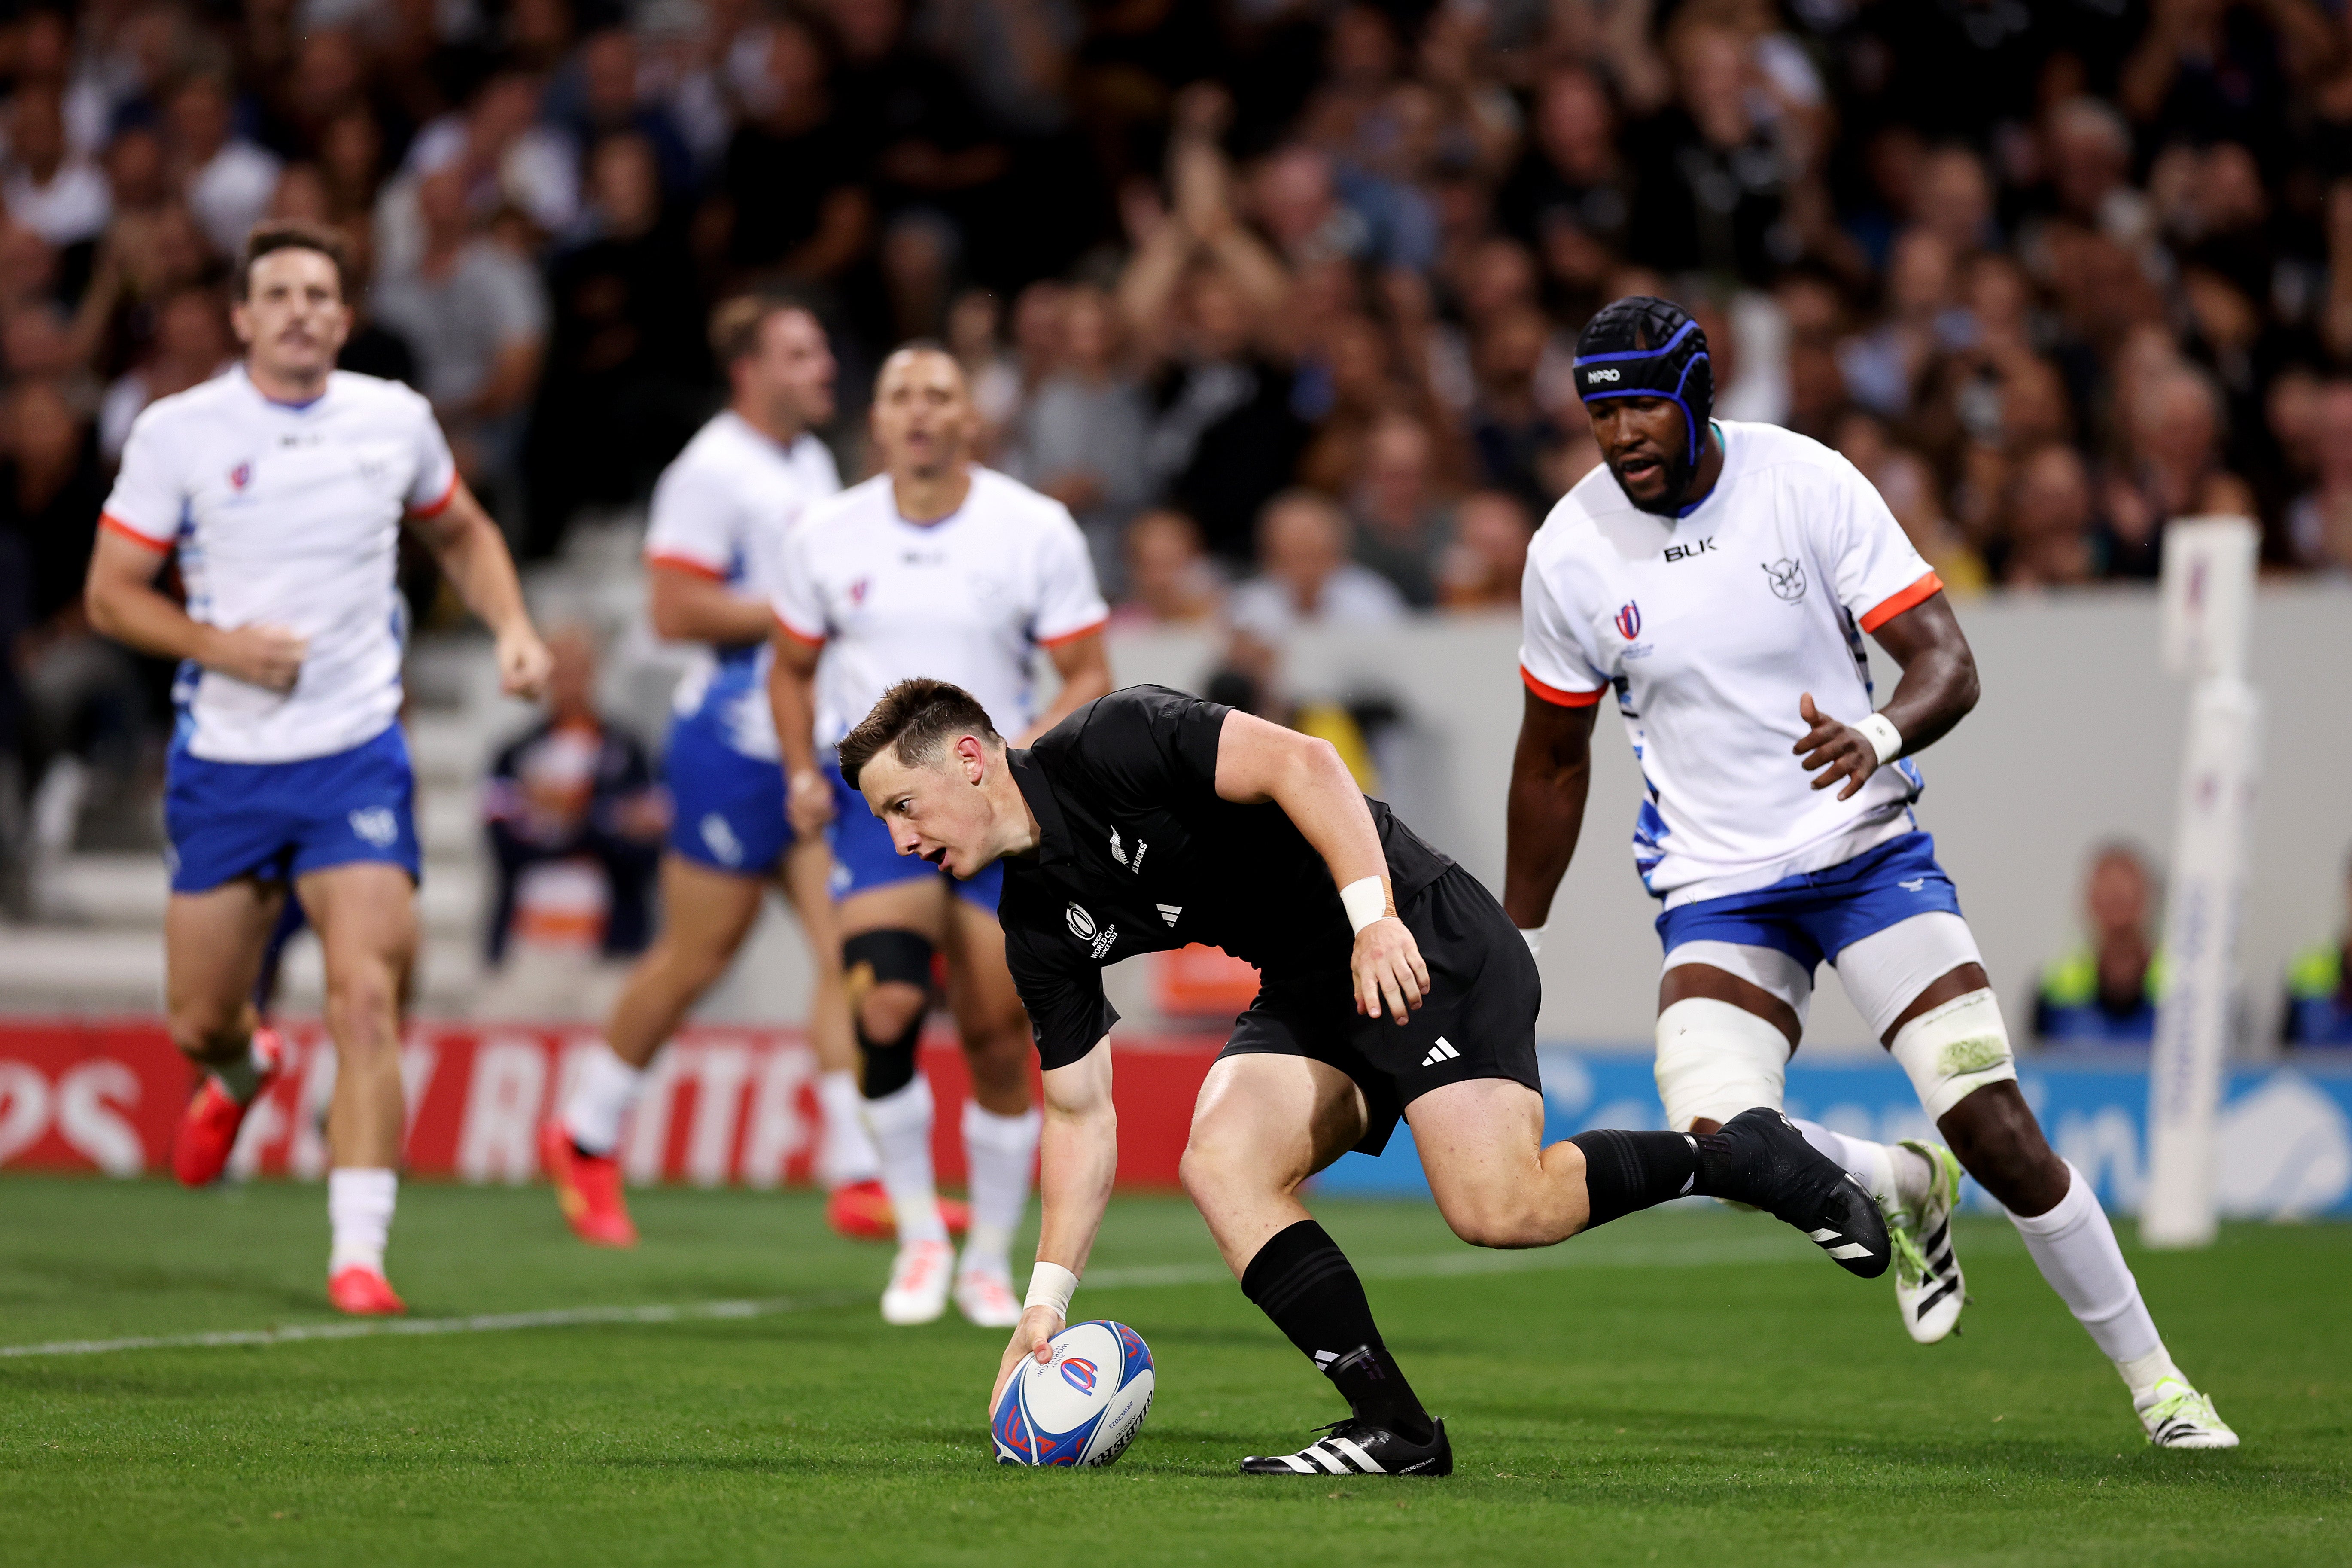 Cam Roigard scored twice in the first six minutes to get the ball rolling for the All Blacks